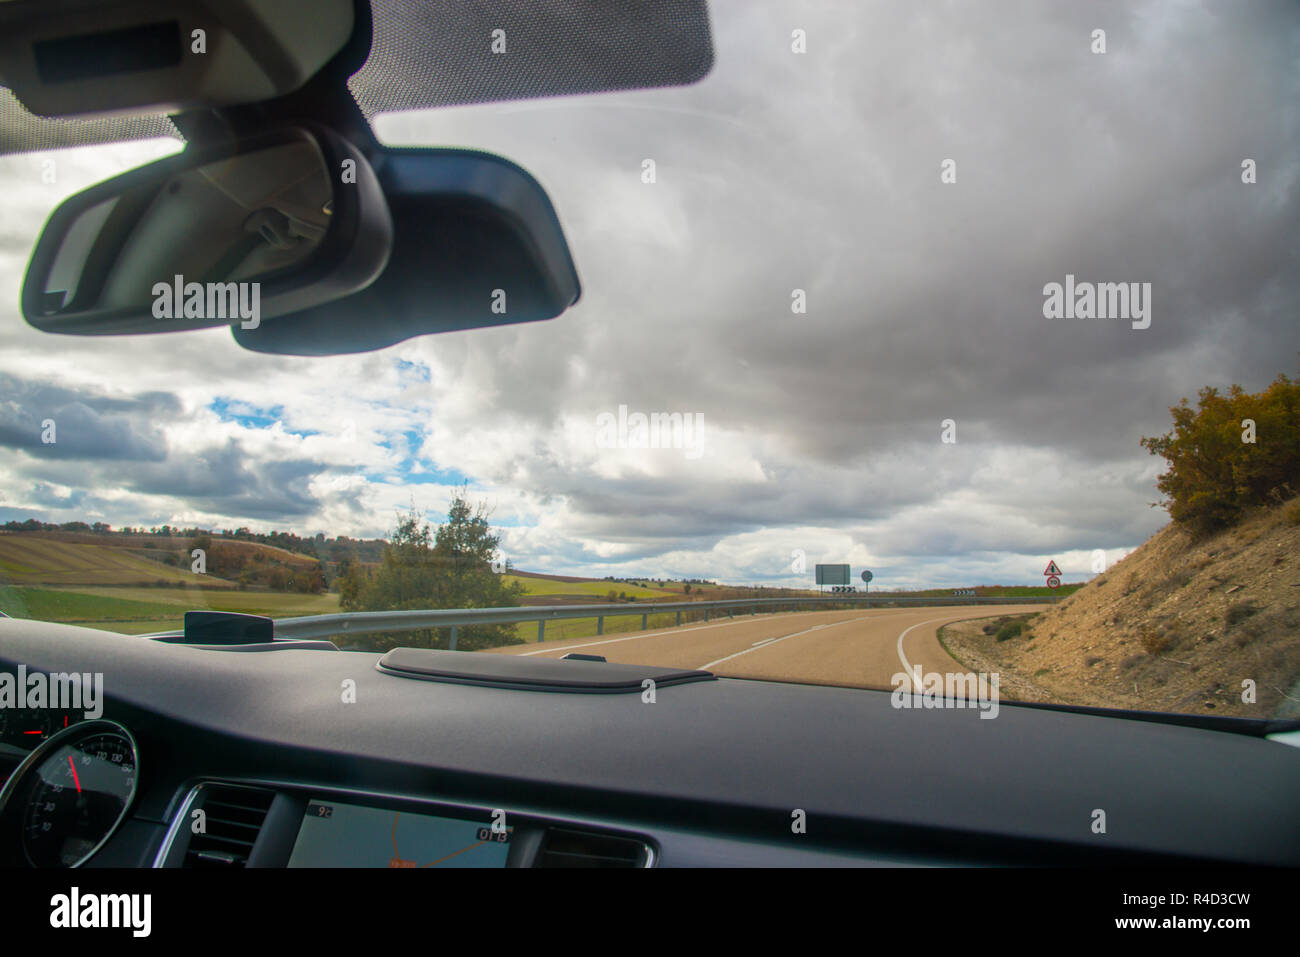 Road viewed from inside a car. Stock Photo